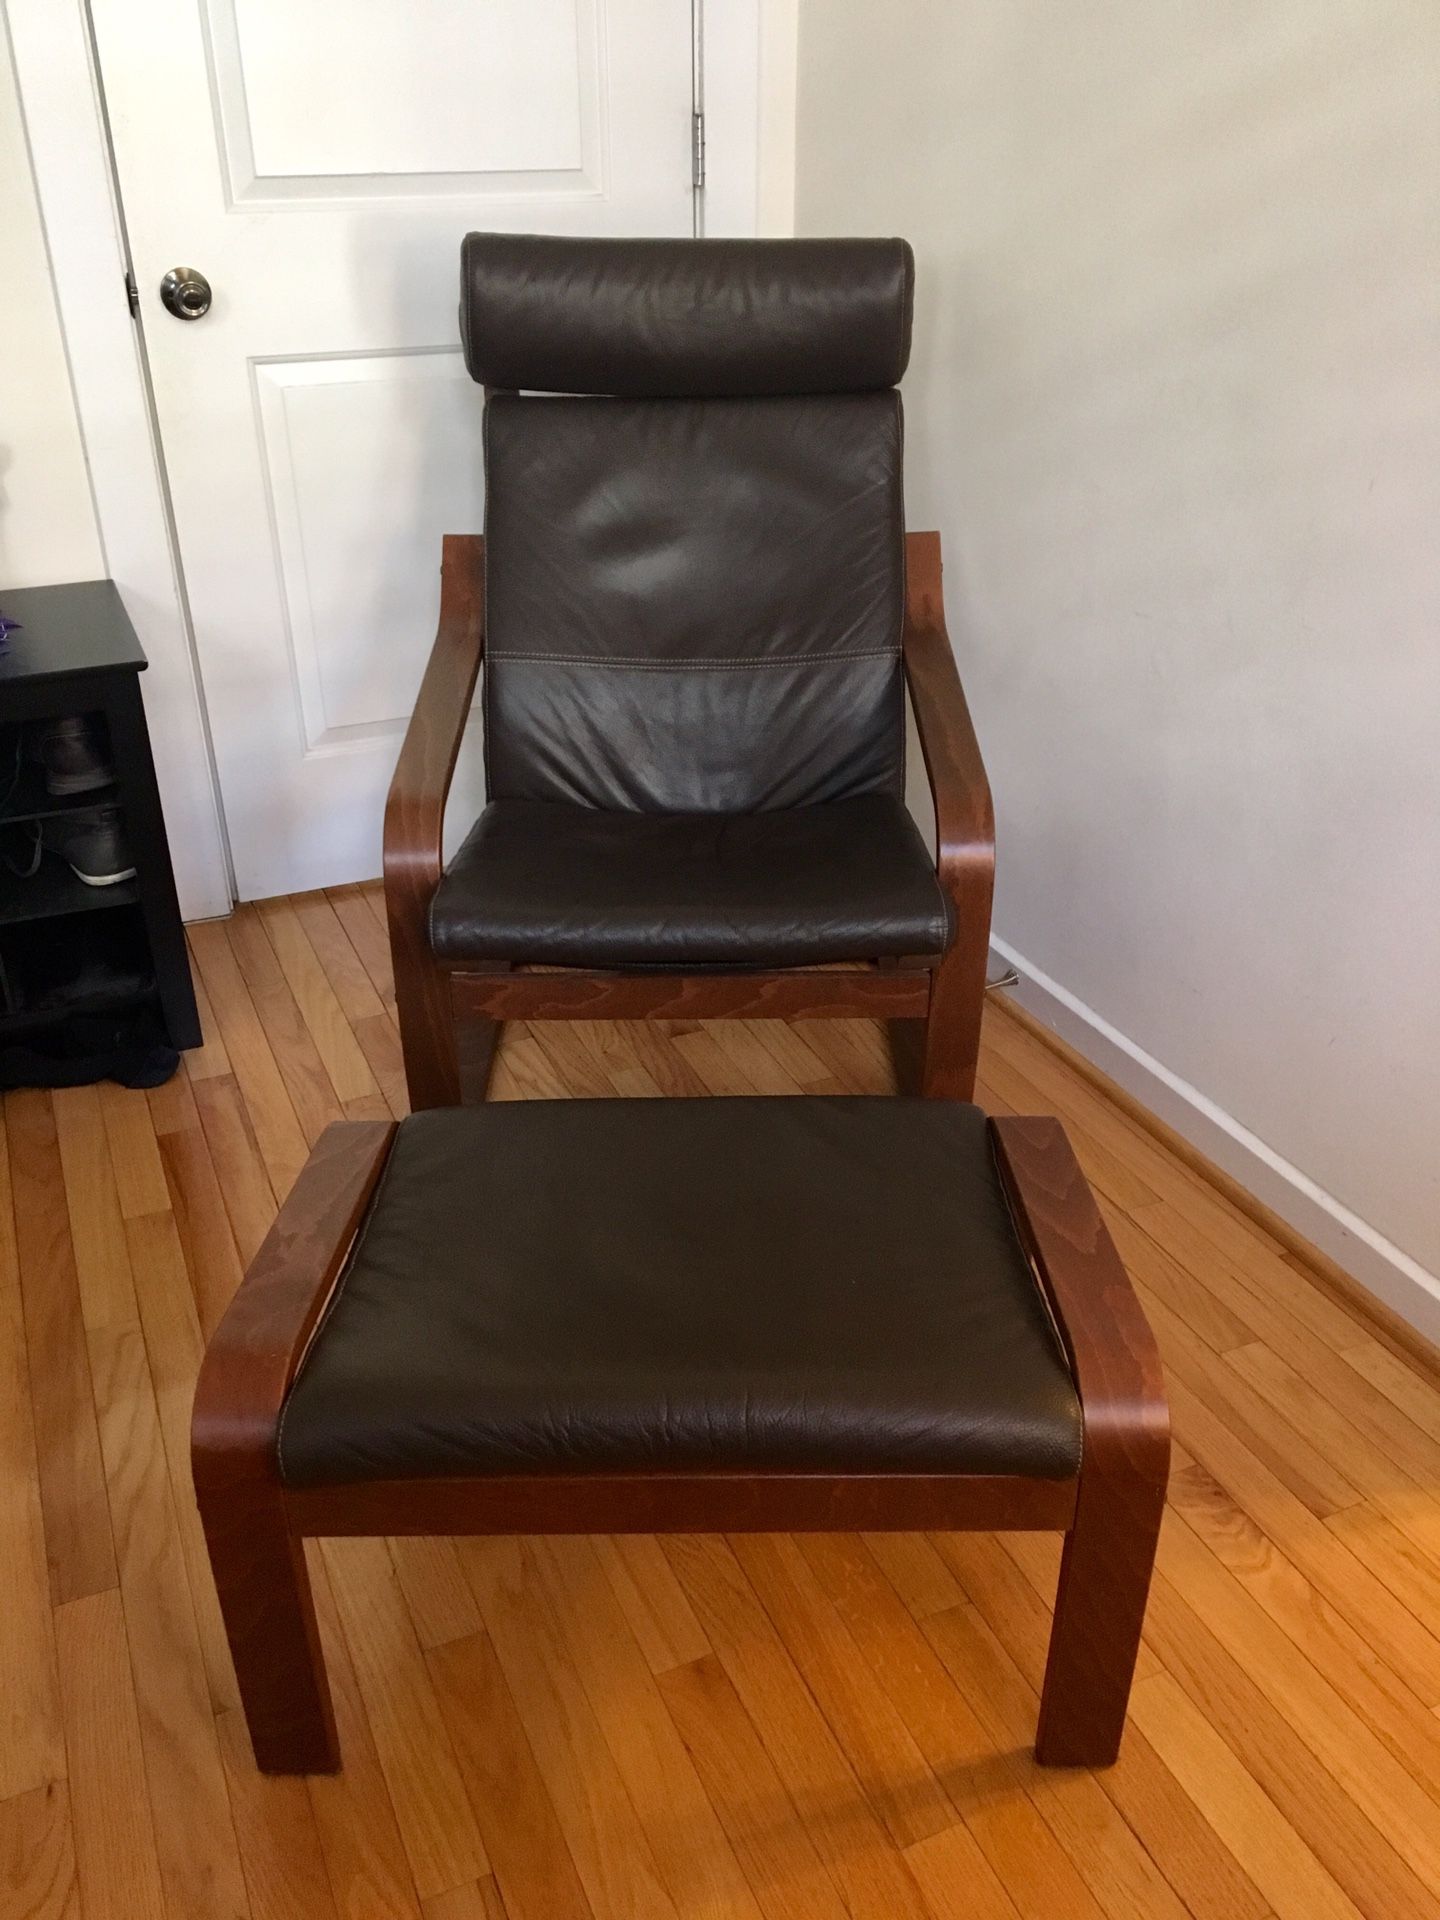 IKEA Poang chair and ottoman. 100% leather